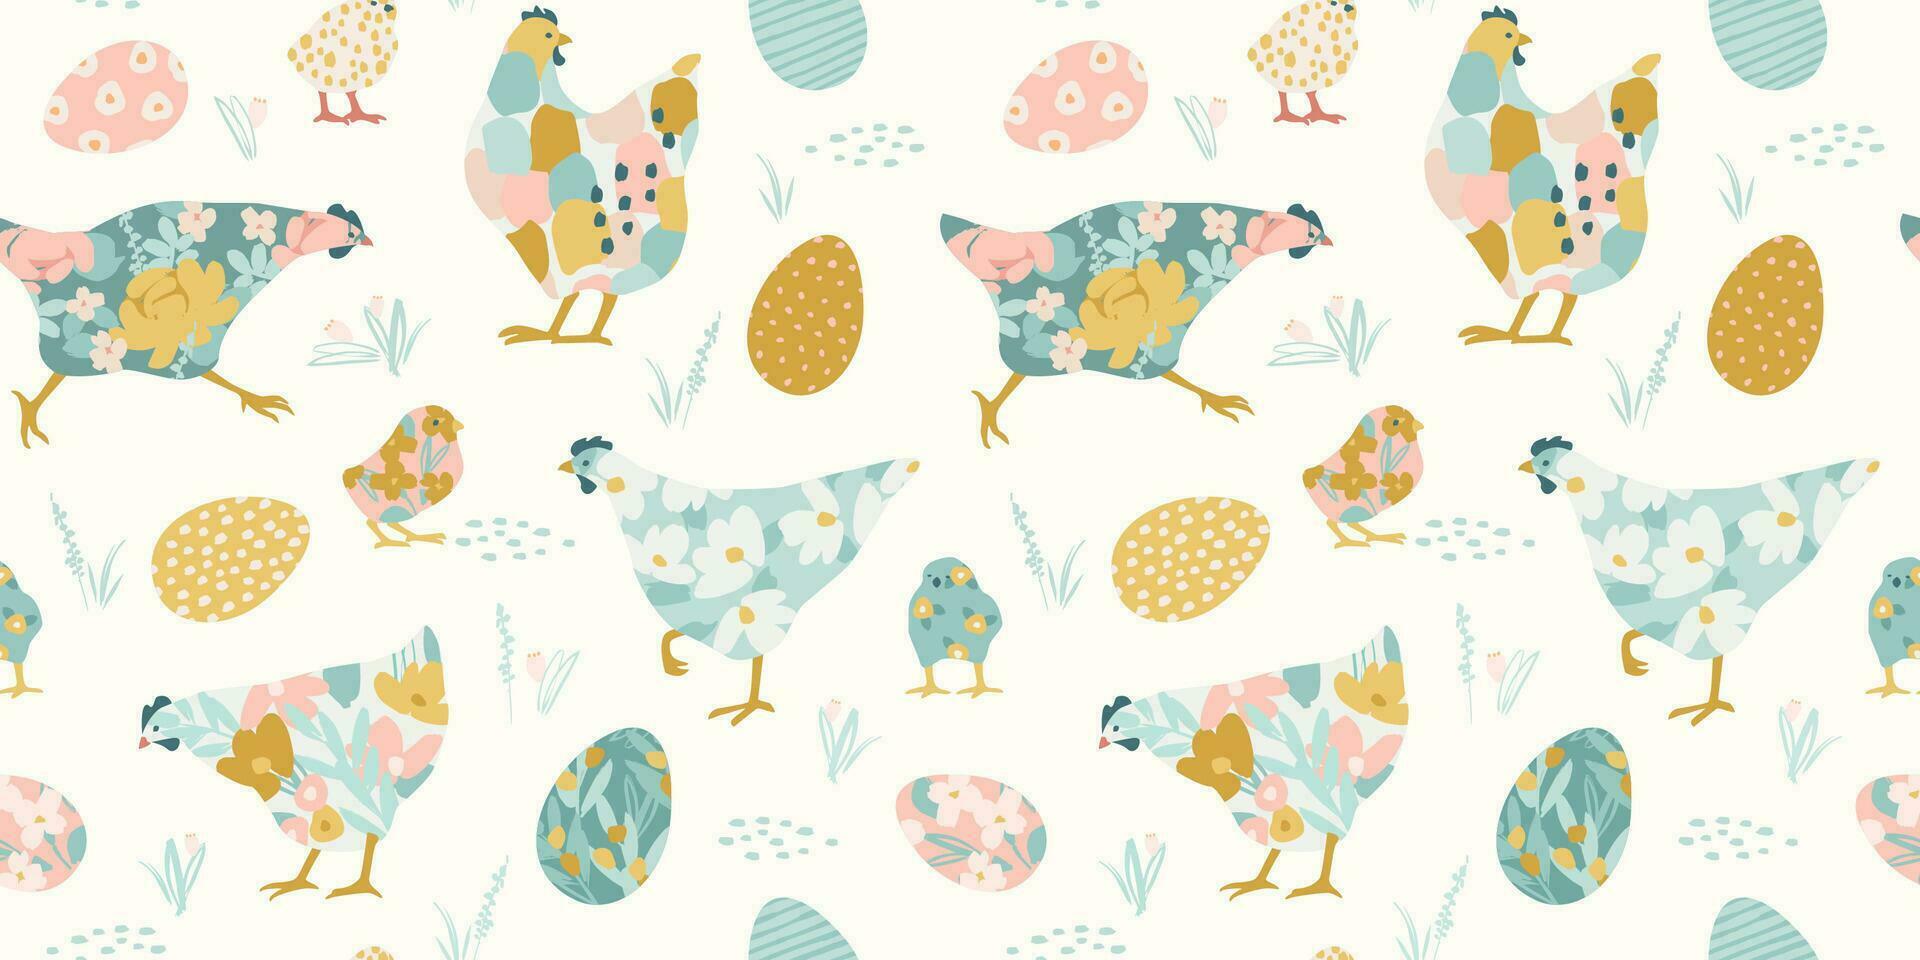 Happy Easter. Vector seamless pattern with abstract chickens. Design element.